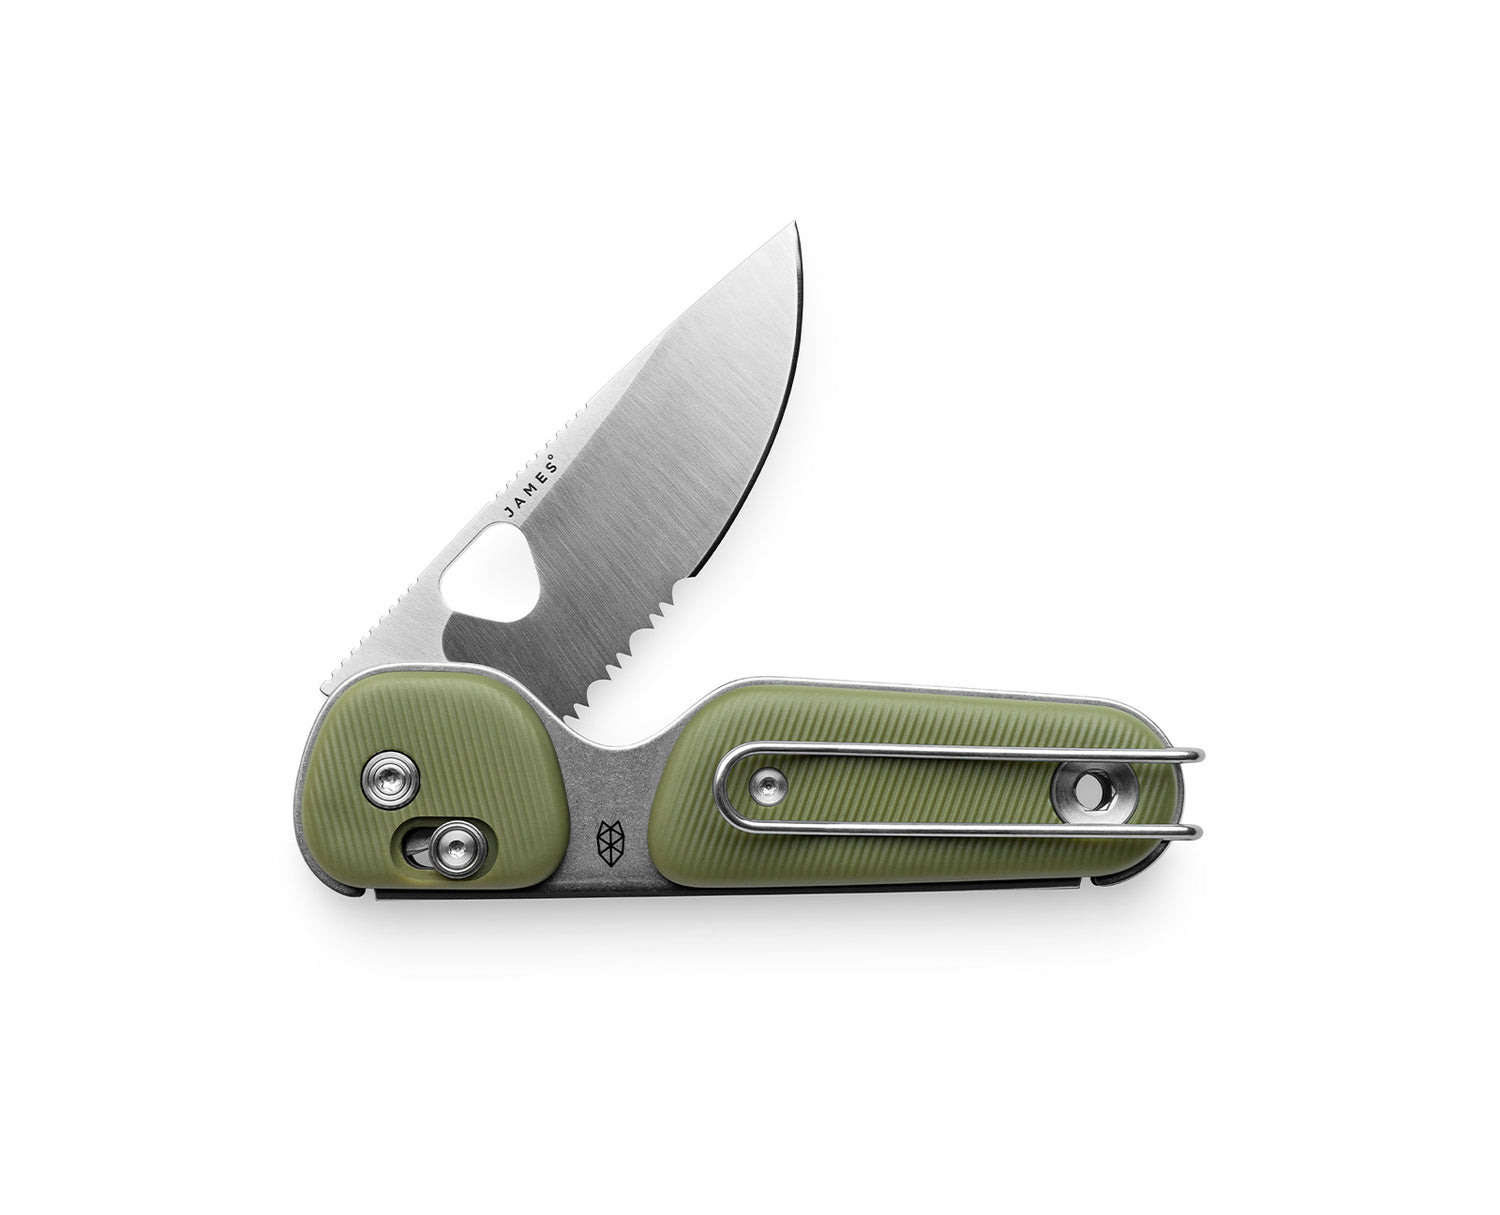 The Redstone knife with OD green handle and serrated, stainless steel blade.